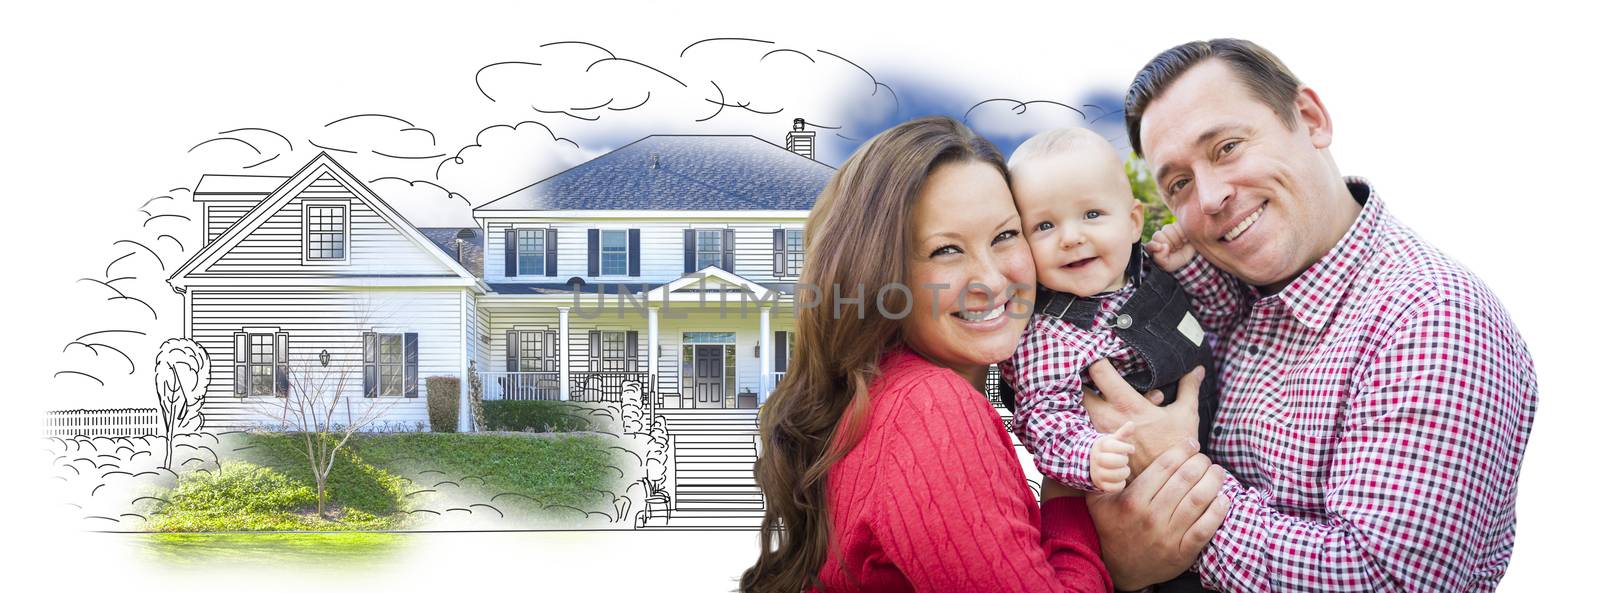 Young Family Over House Drawing and Photo on White by Feverpitched